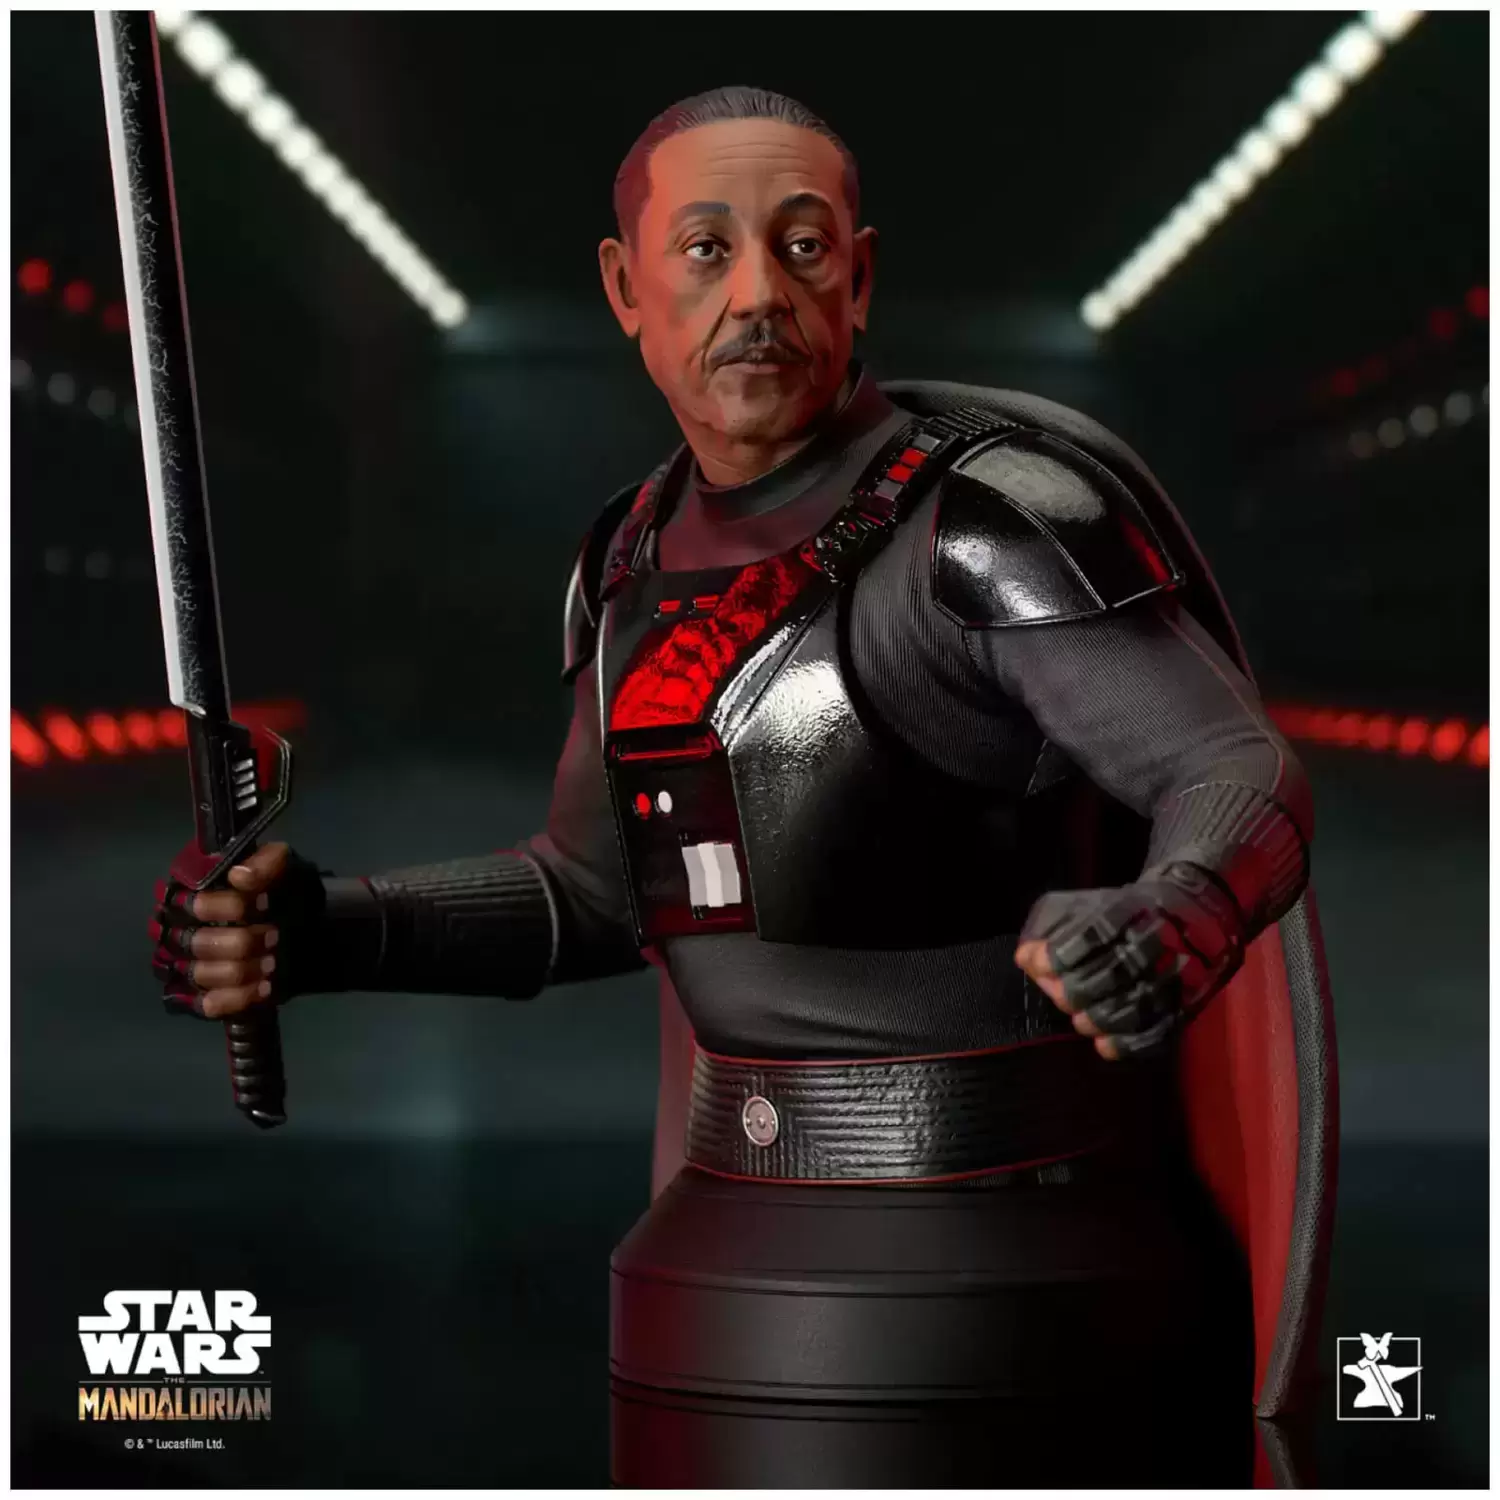 Gentle Giant Busts - The Mandalorian - Moff Gideon Bust (Free Comic Book Day 2022)